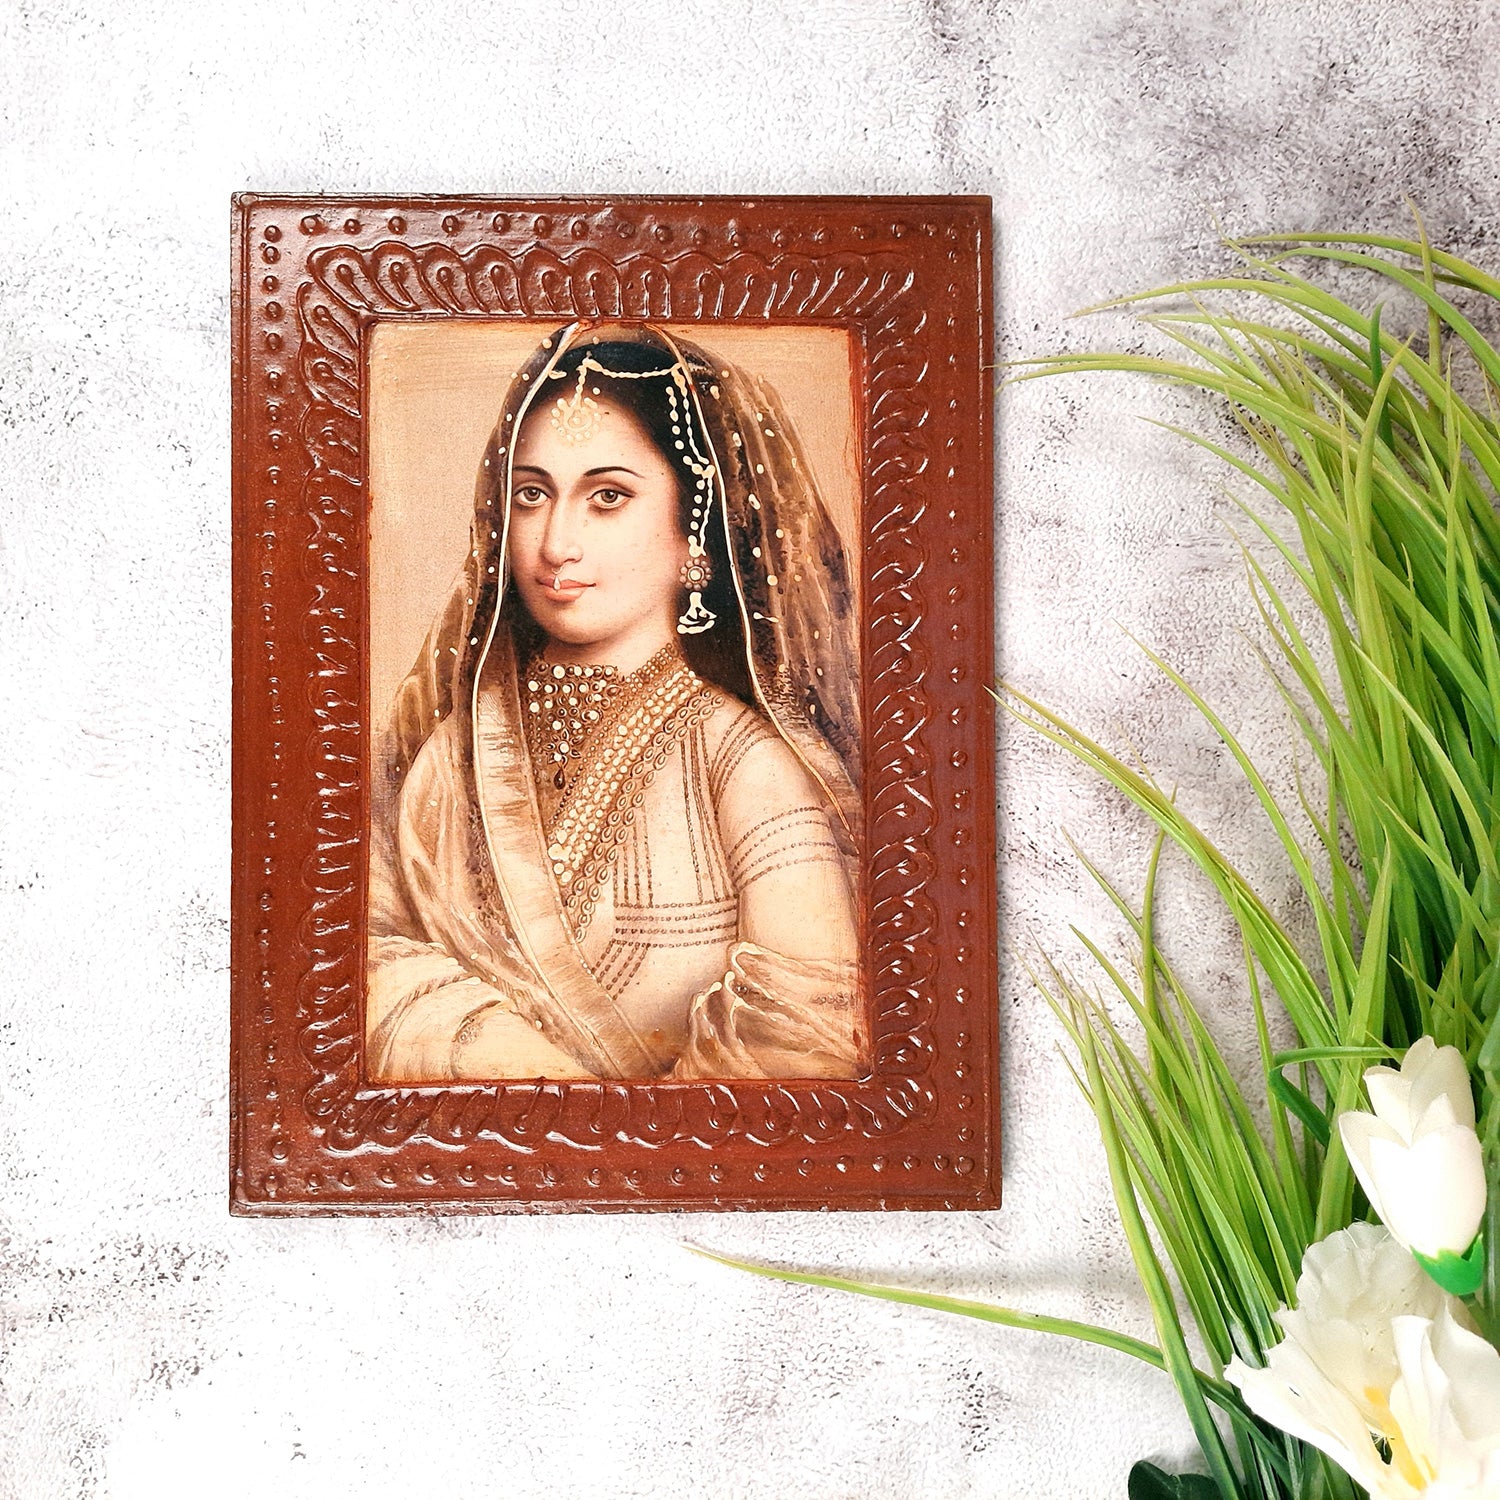 Wooden Framed Poster Wall Hanging - Traditional Lady Design - for Home, Paintings for Living Room, Bedroom, Hallway, Office Decor & Gifts - 12 Inch